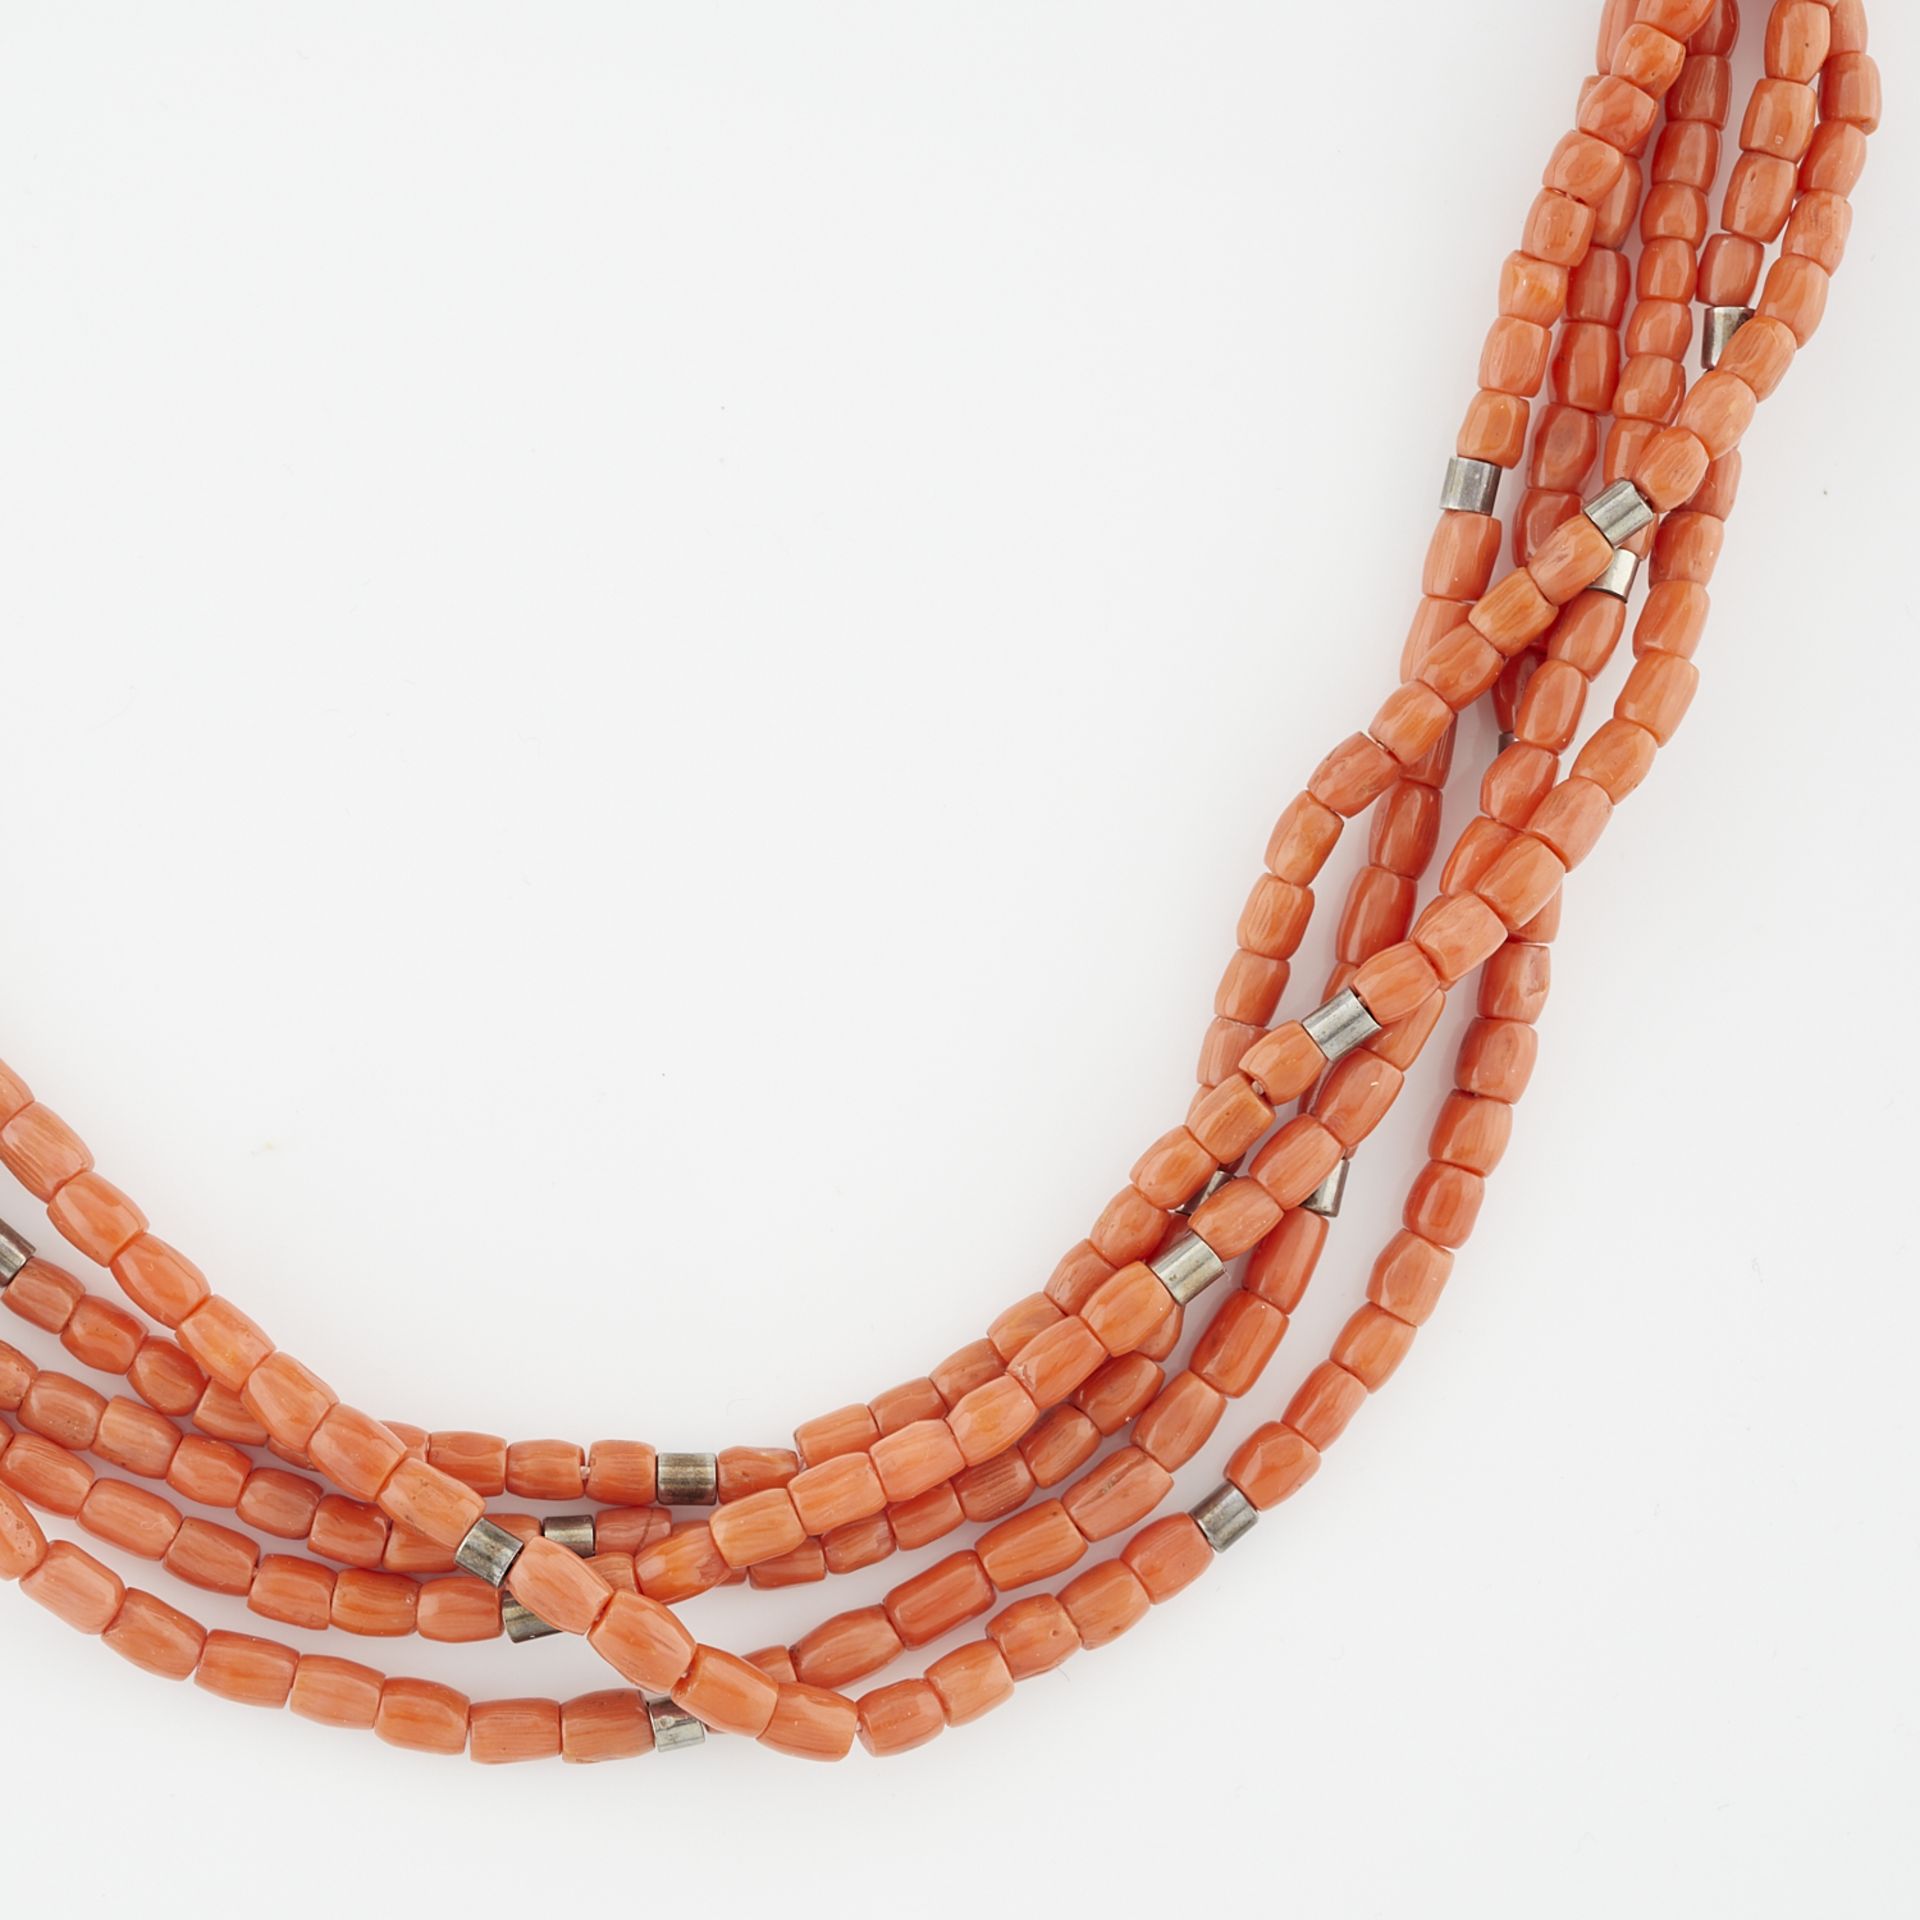 Five Strand Coral Heishi Necklace - Image 6 of 7